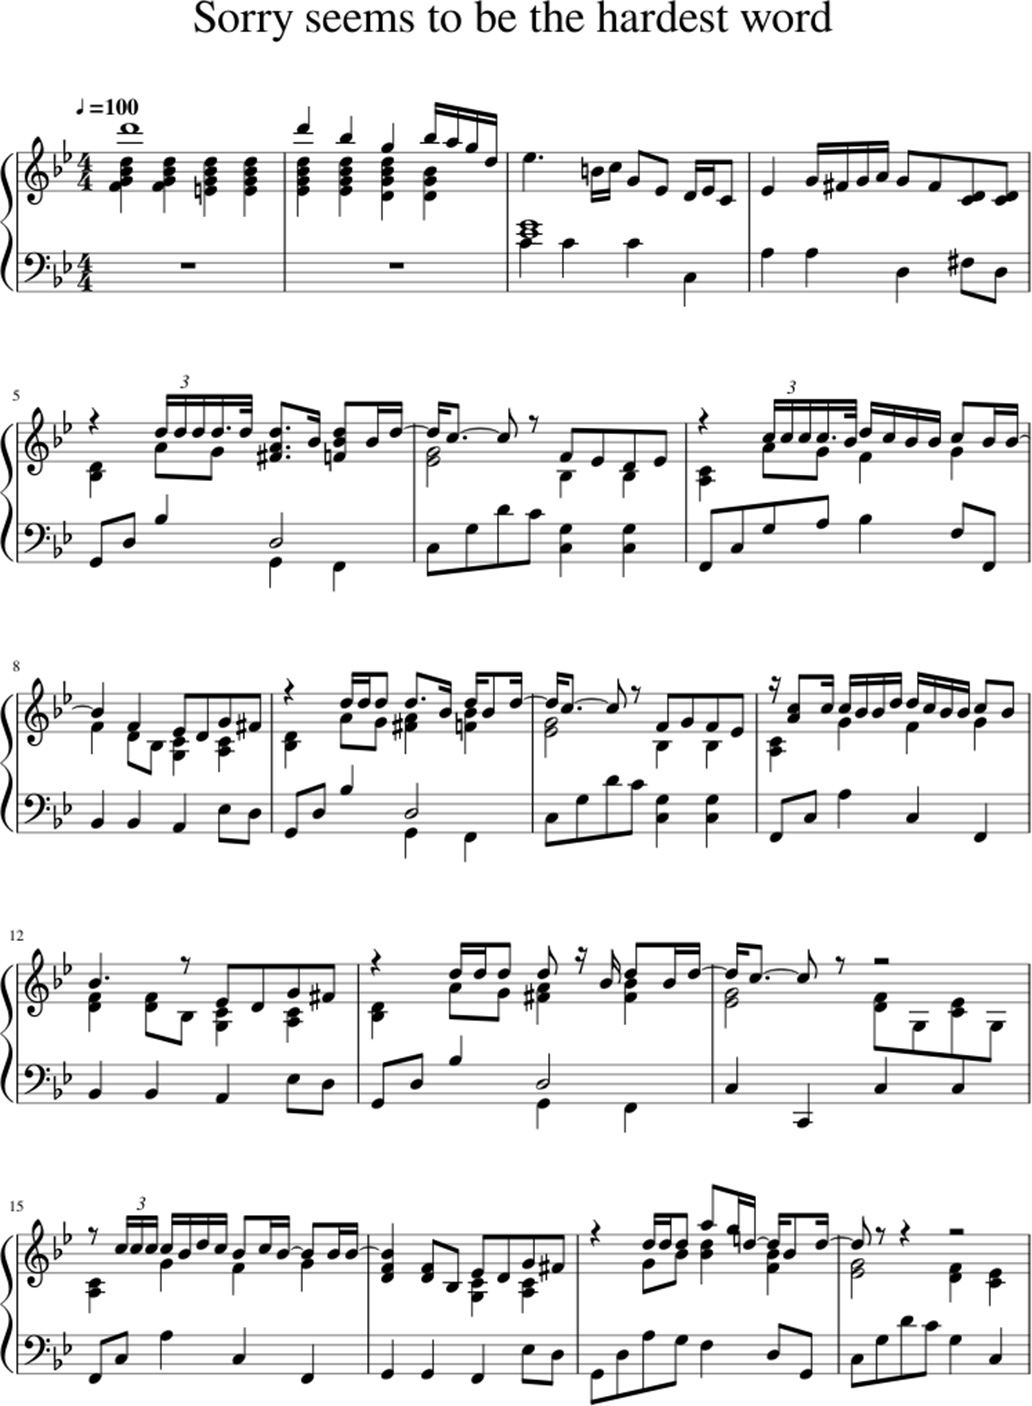 Sorry seems to be the hardest word sheet music notes 1